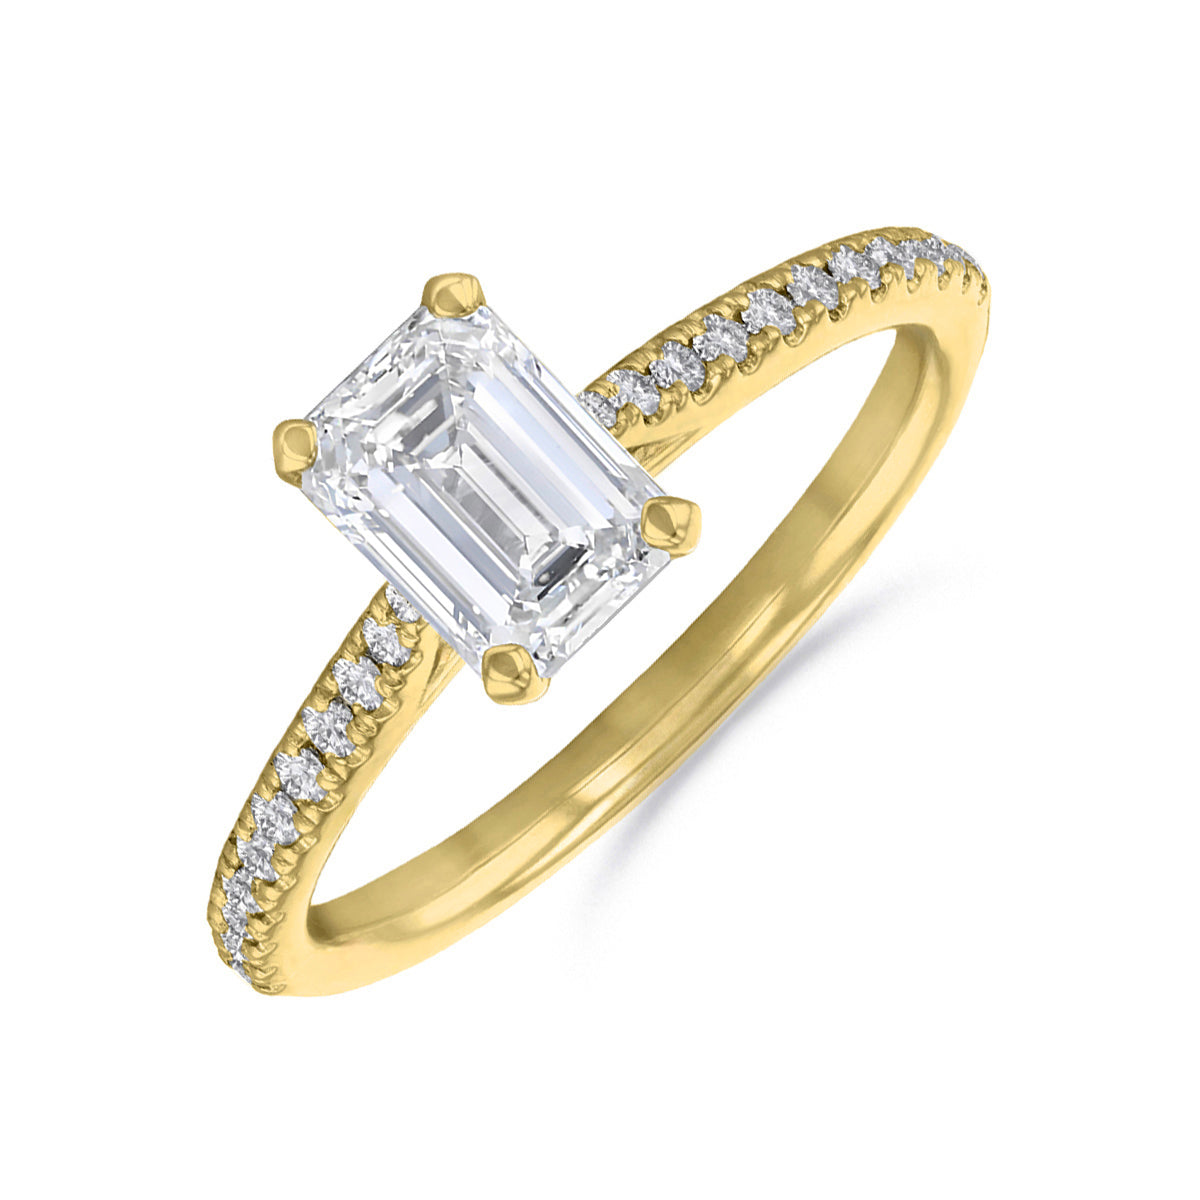 2-00ct-ophelia-shoulder-set-emerald-cut-solitaire-diamond-engagement-ring-18ct-yellow-gold